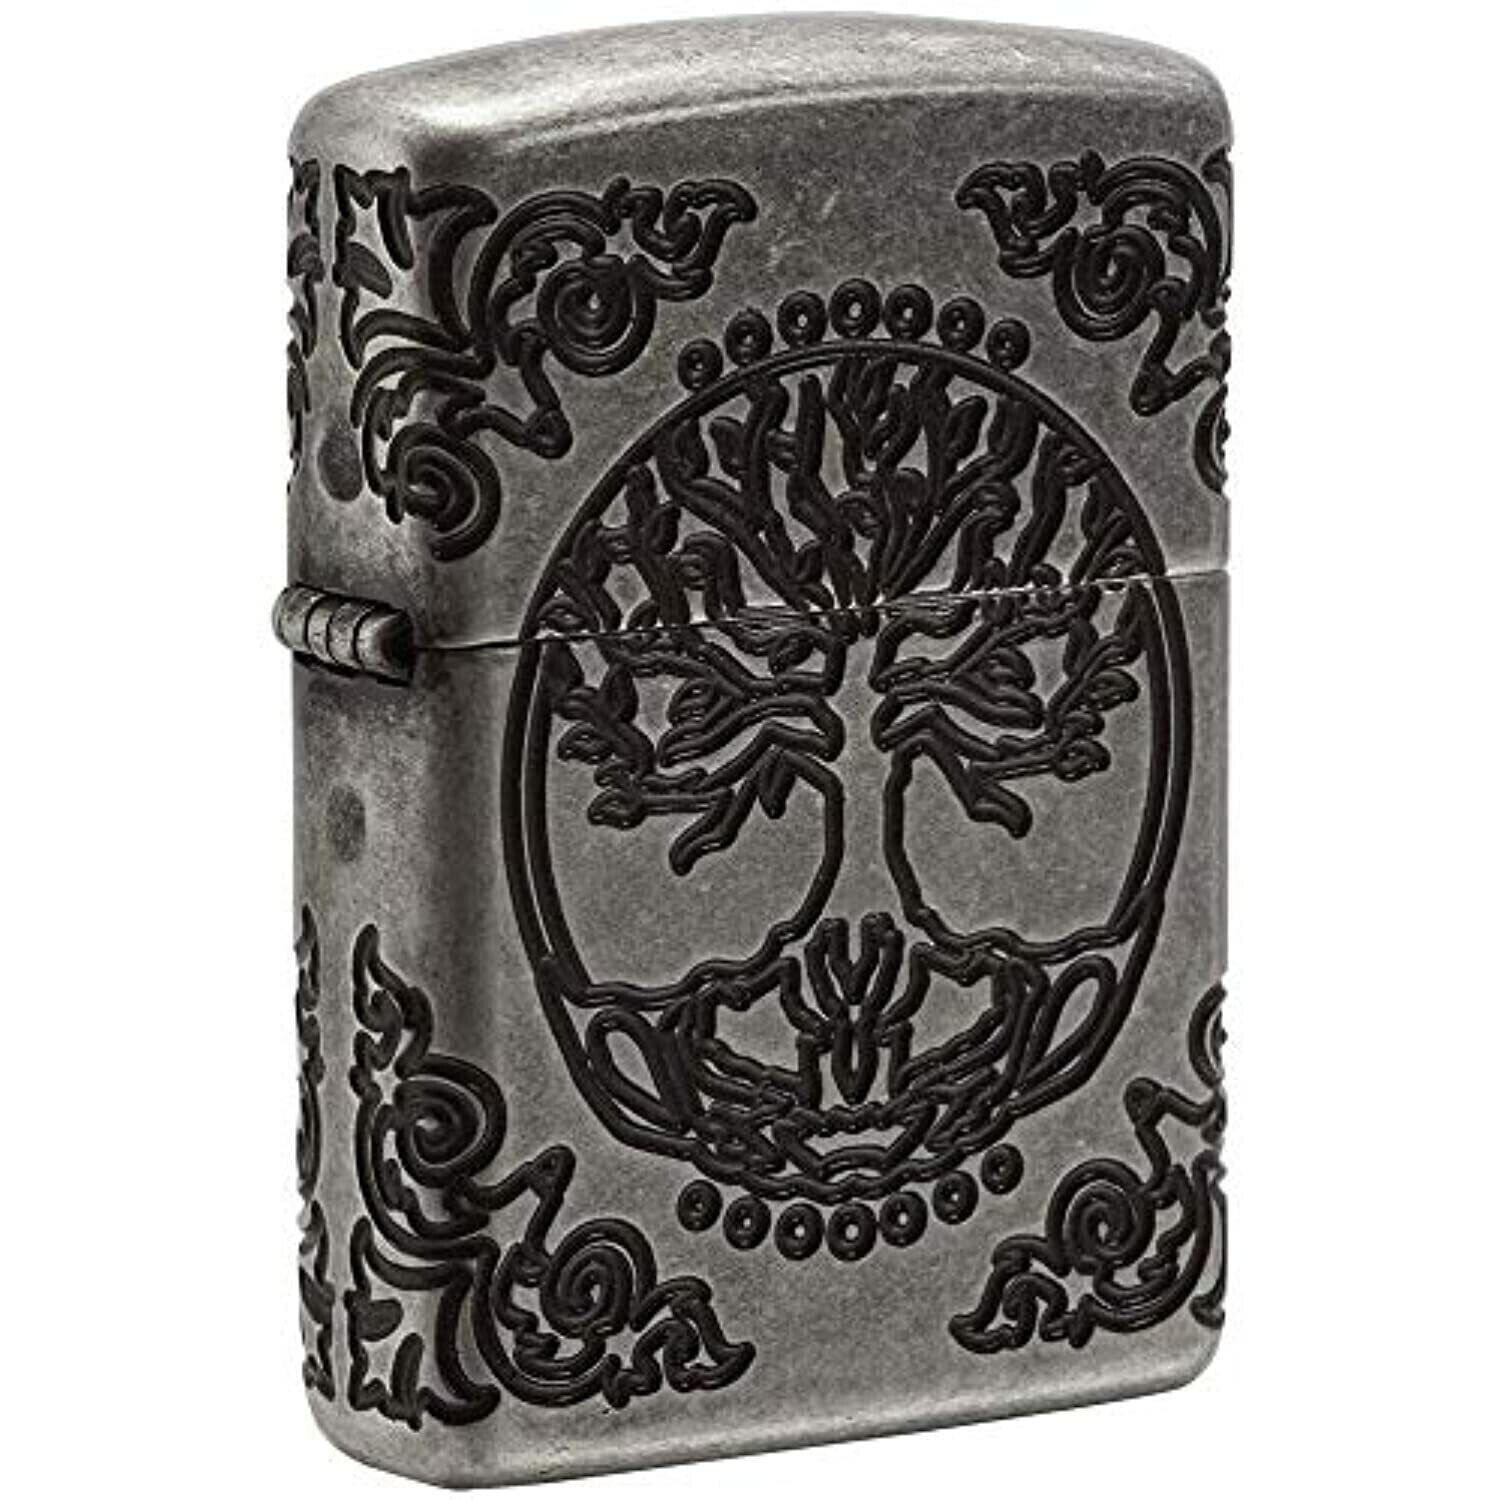 Zippo 29670, Tree of Life Deep Carved Antique Silver Finish Lighter